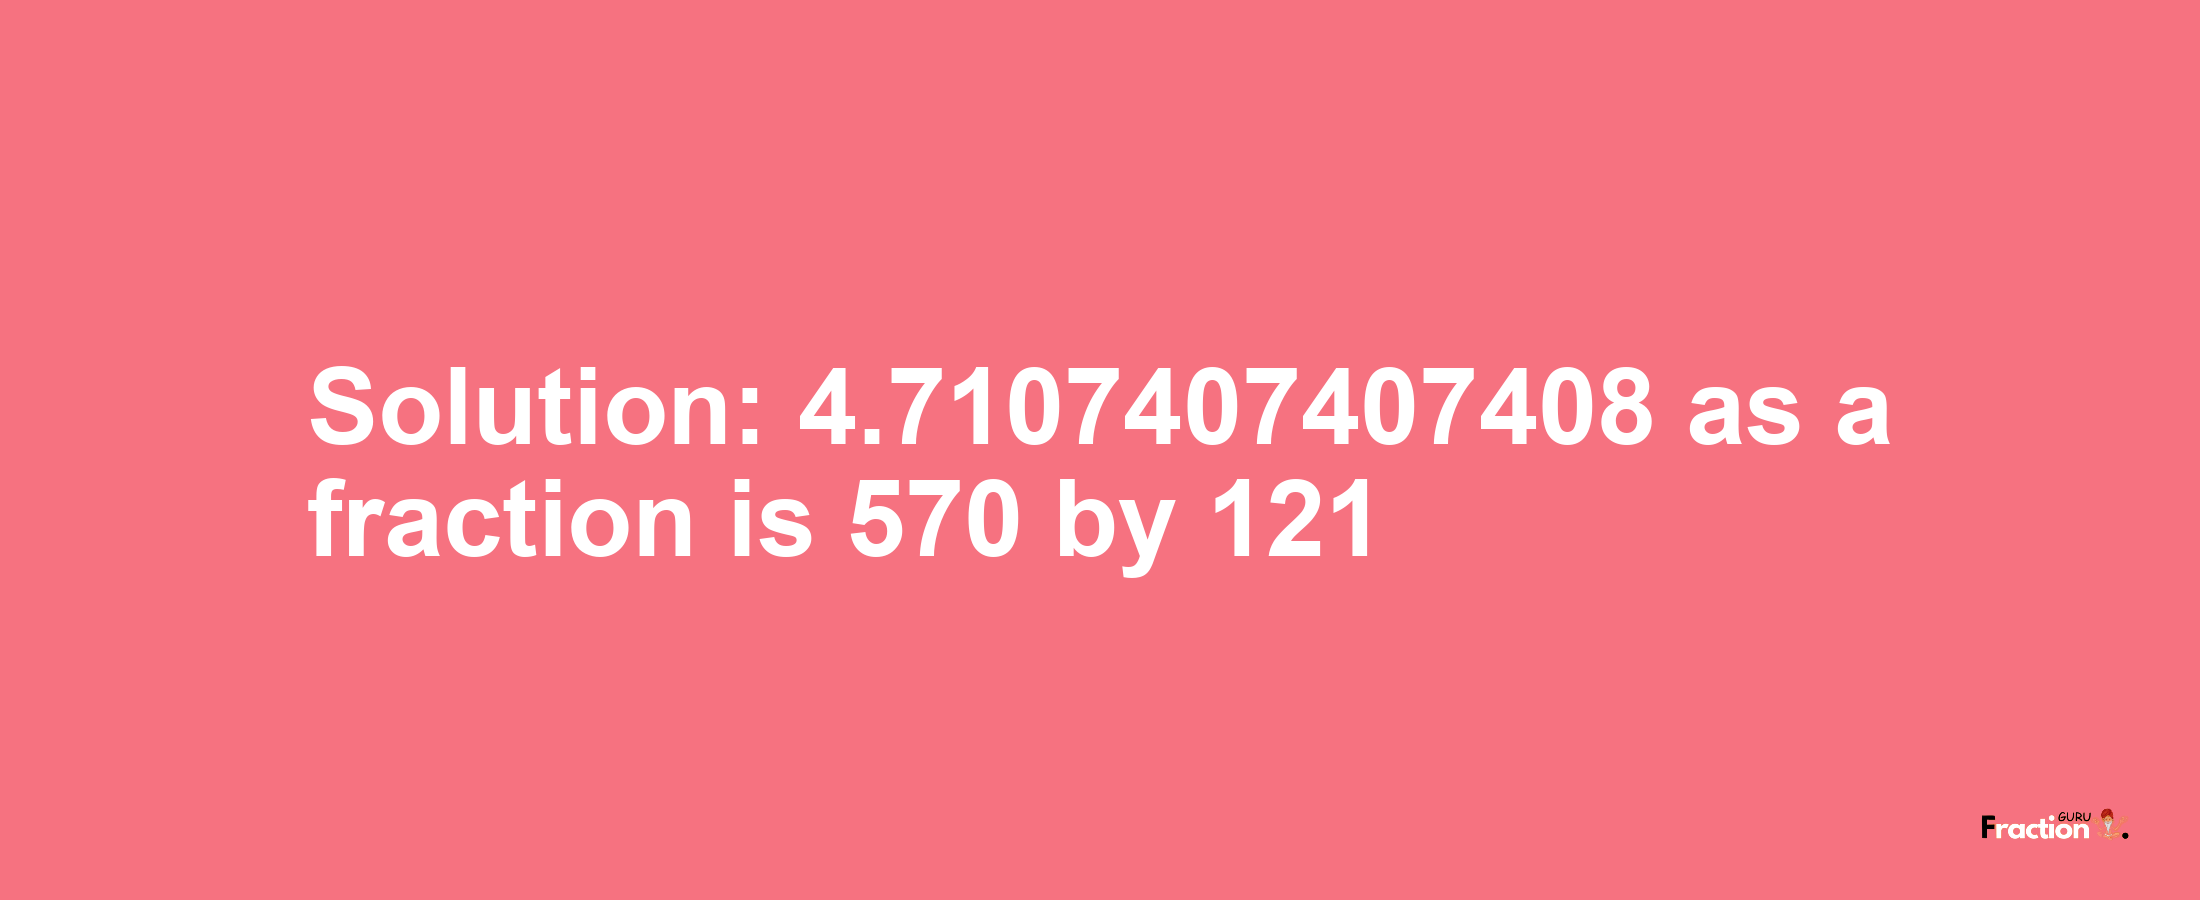 Solution:4.7107407407408 as a fraction is 570/121